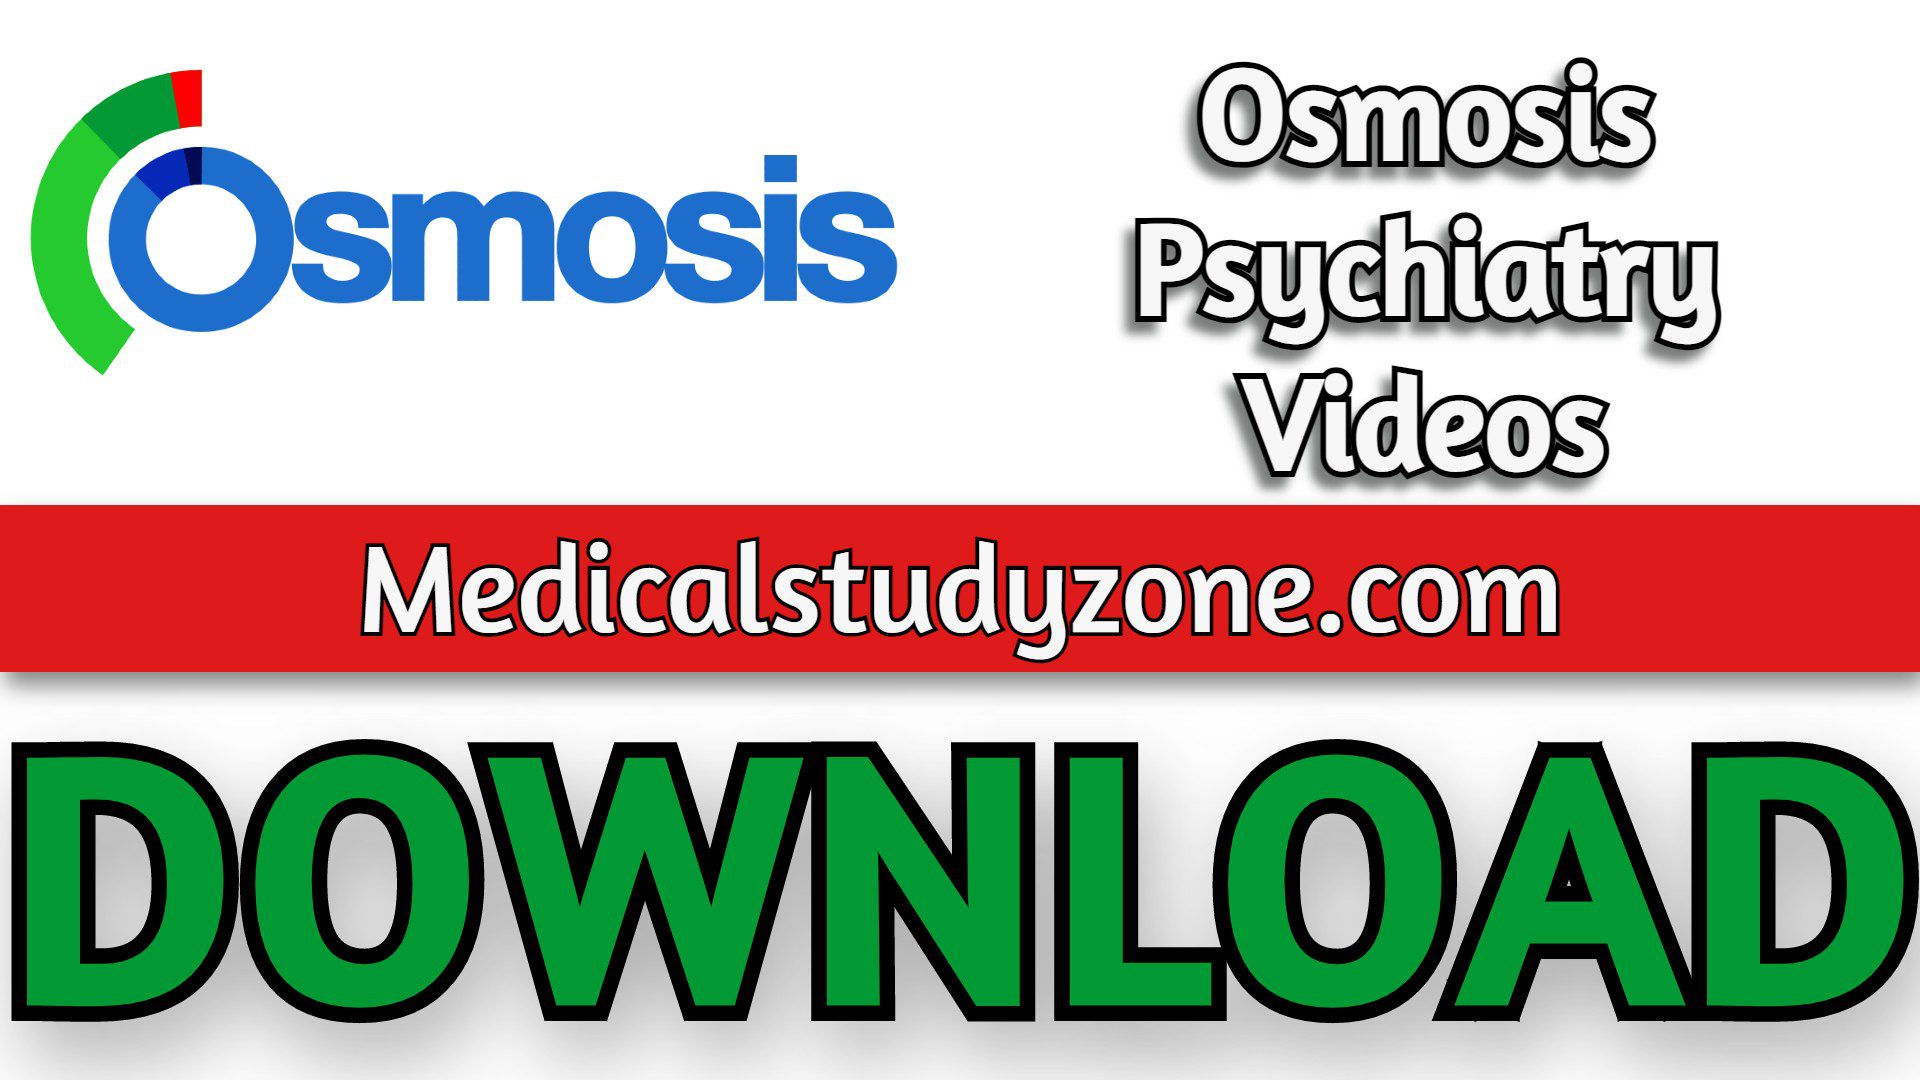 Osmosis Psychiatry Videos 2022 Free Download